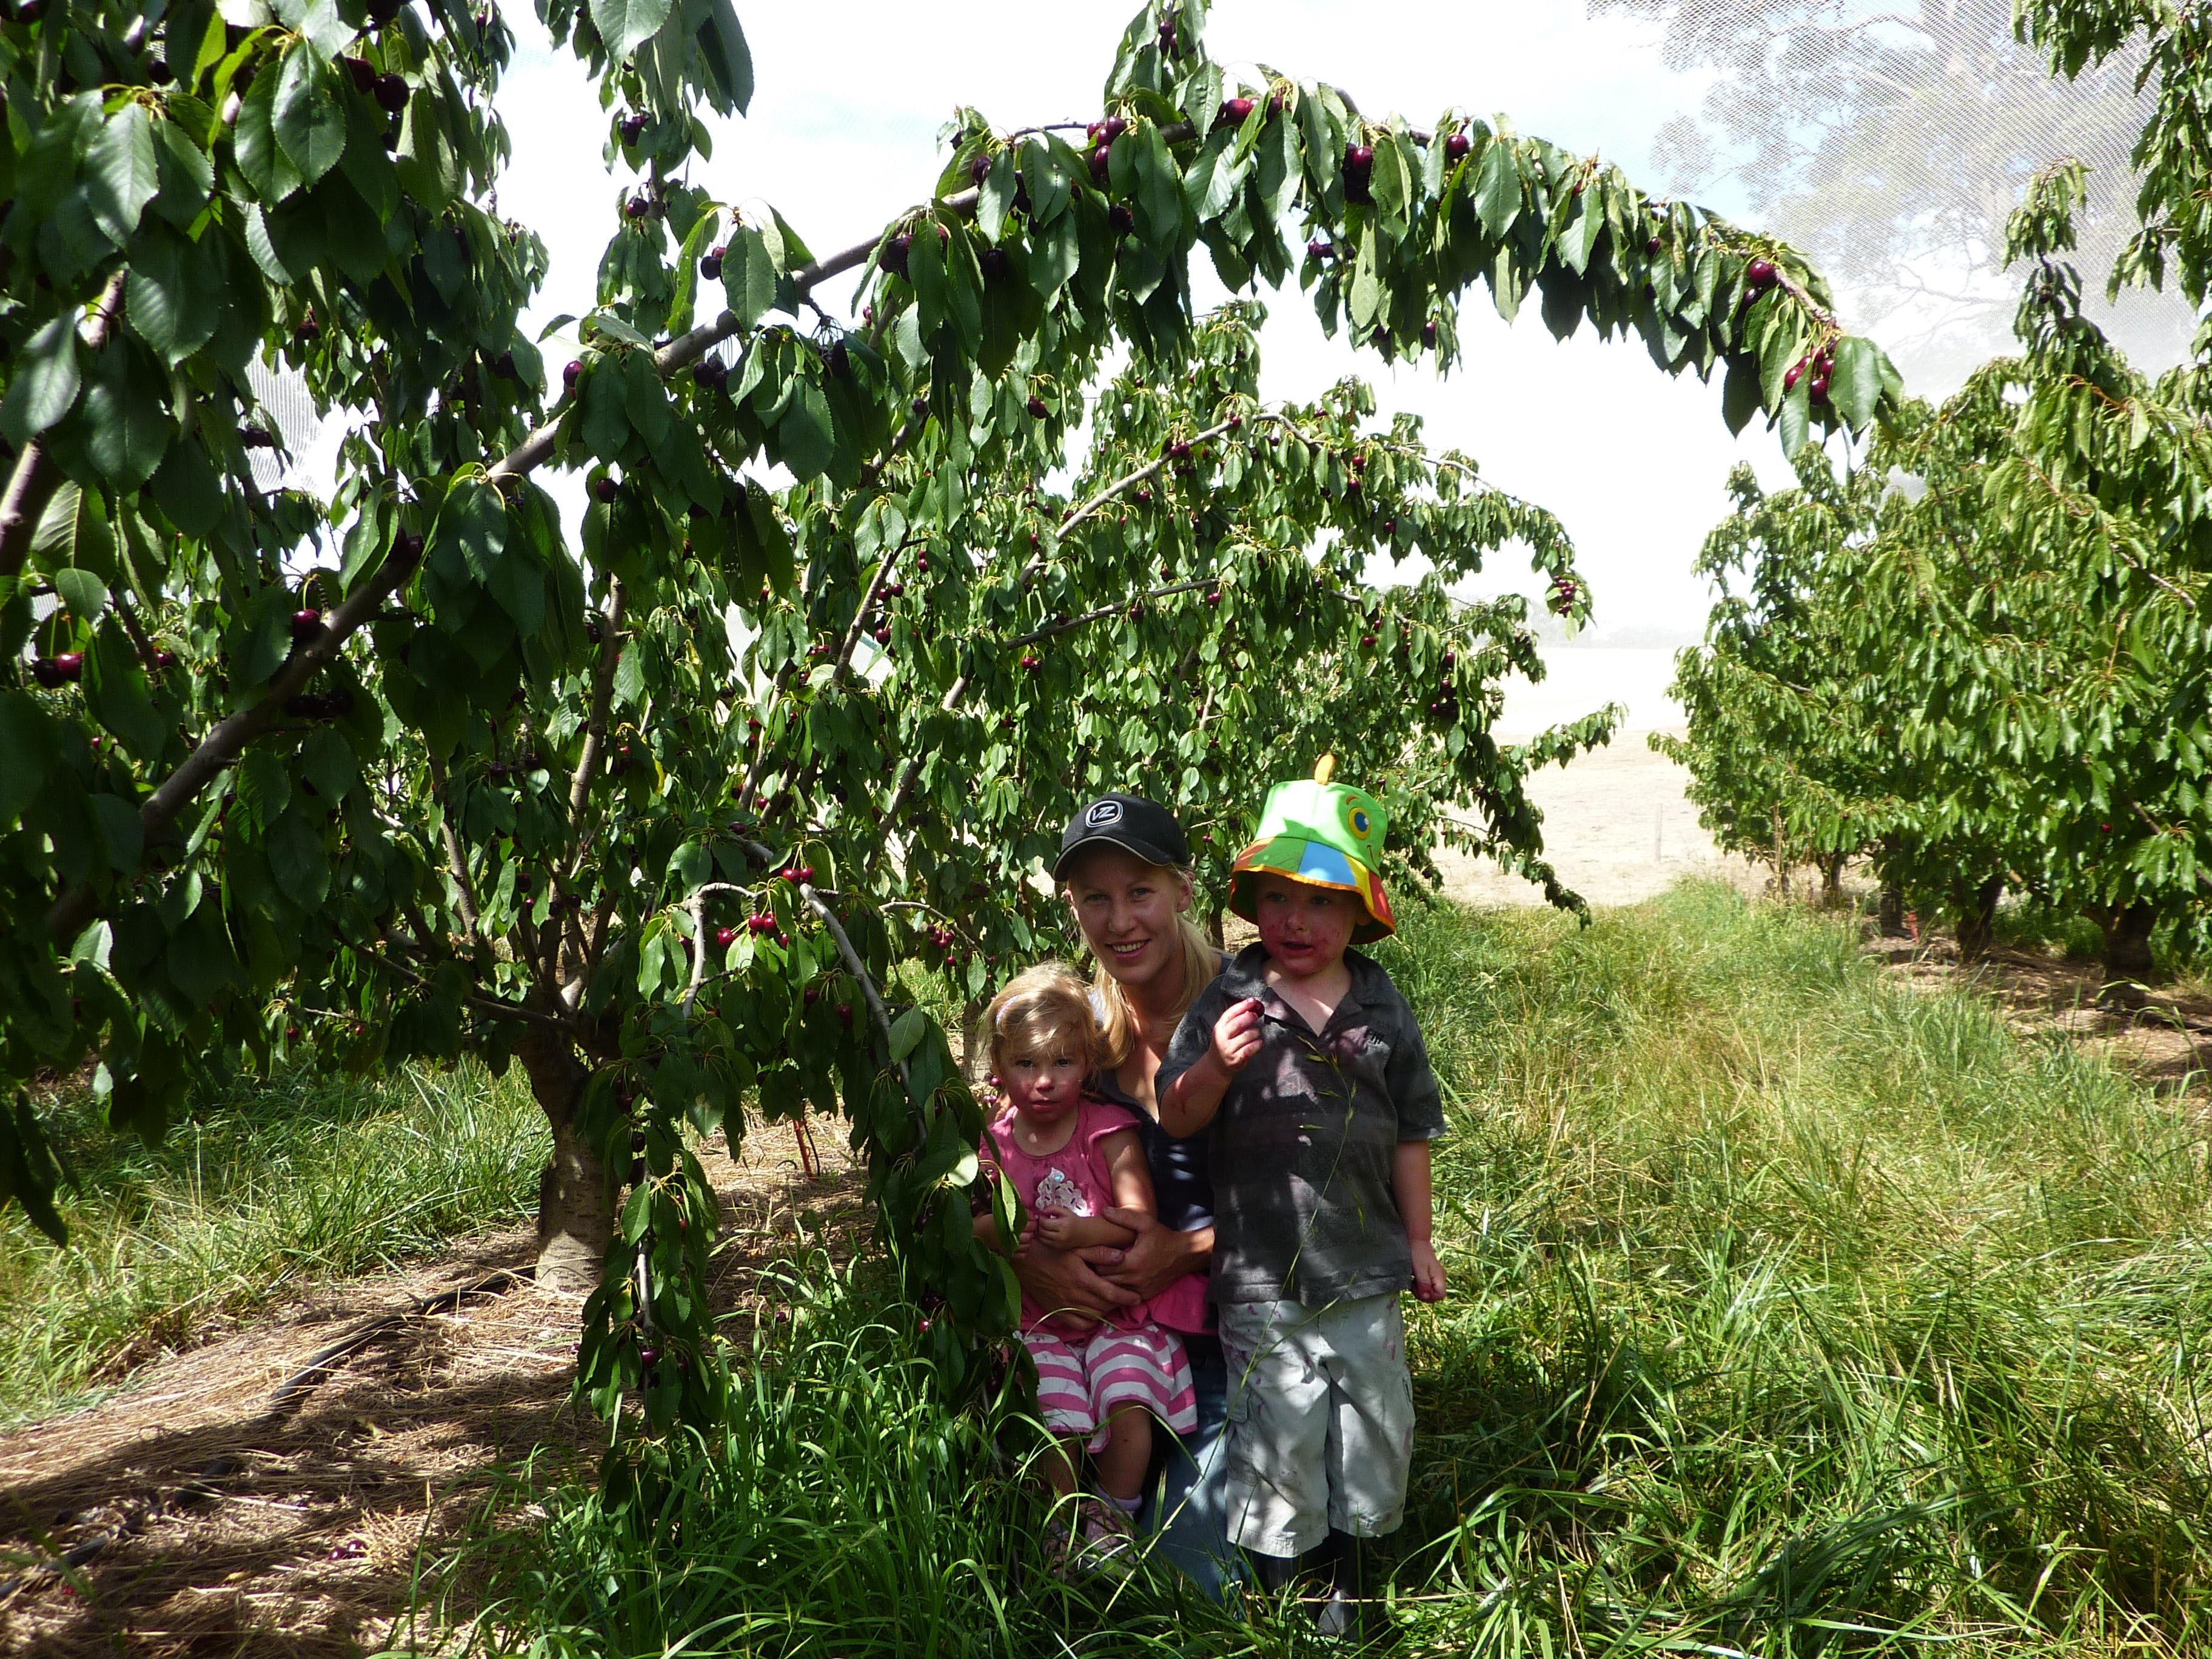 Harben Vale Pick Your Own Cherries - Mount Gambier Accommodation